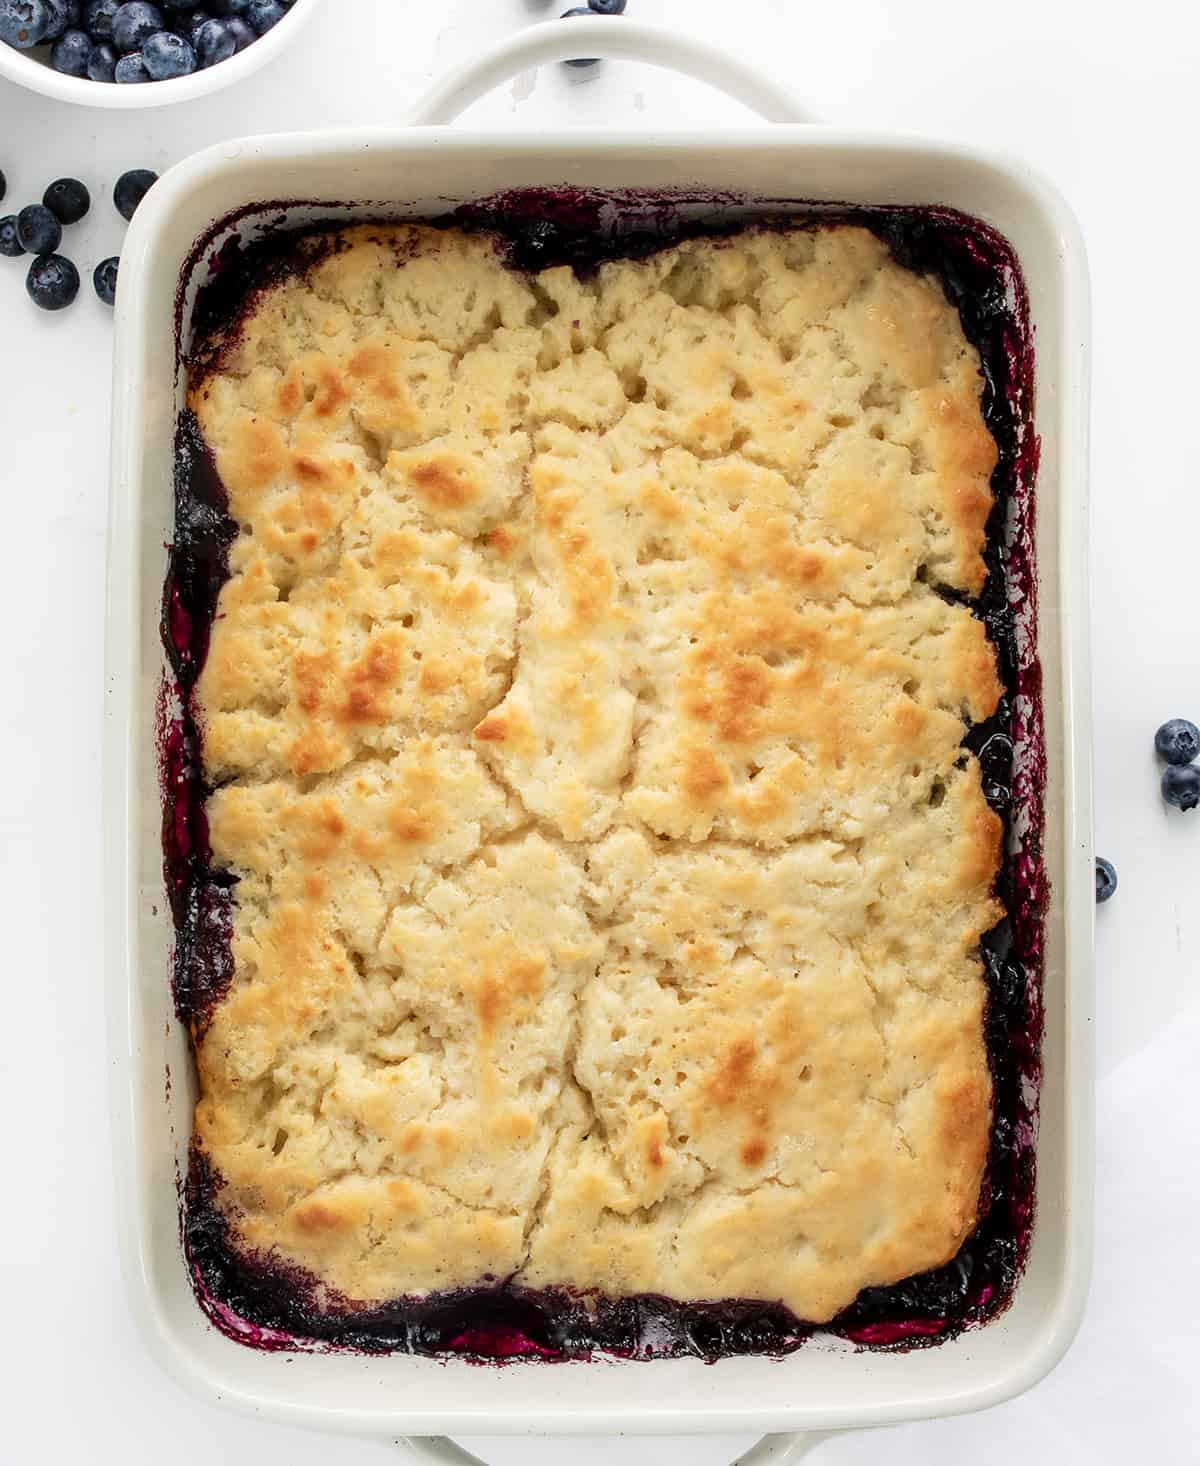 Pan of Butter Swim Biscuit Blueberry Cobbler with Fresh Blueberries.